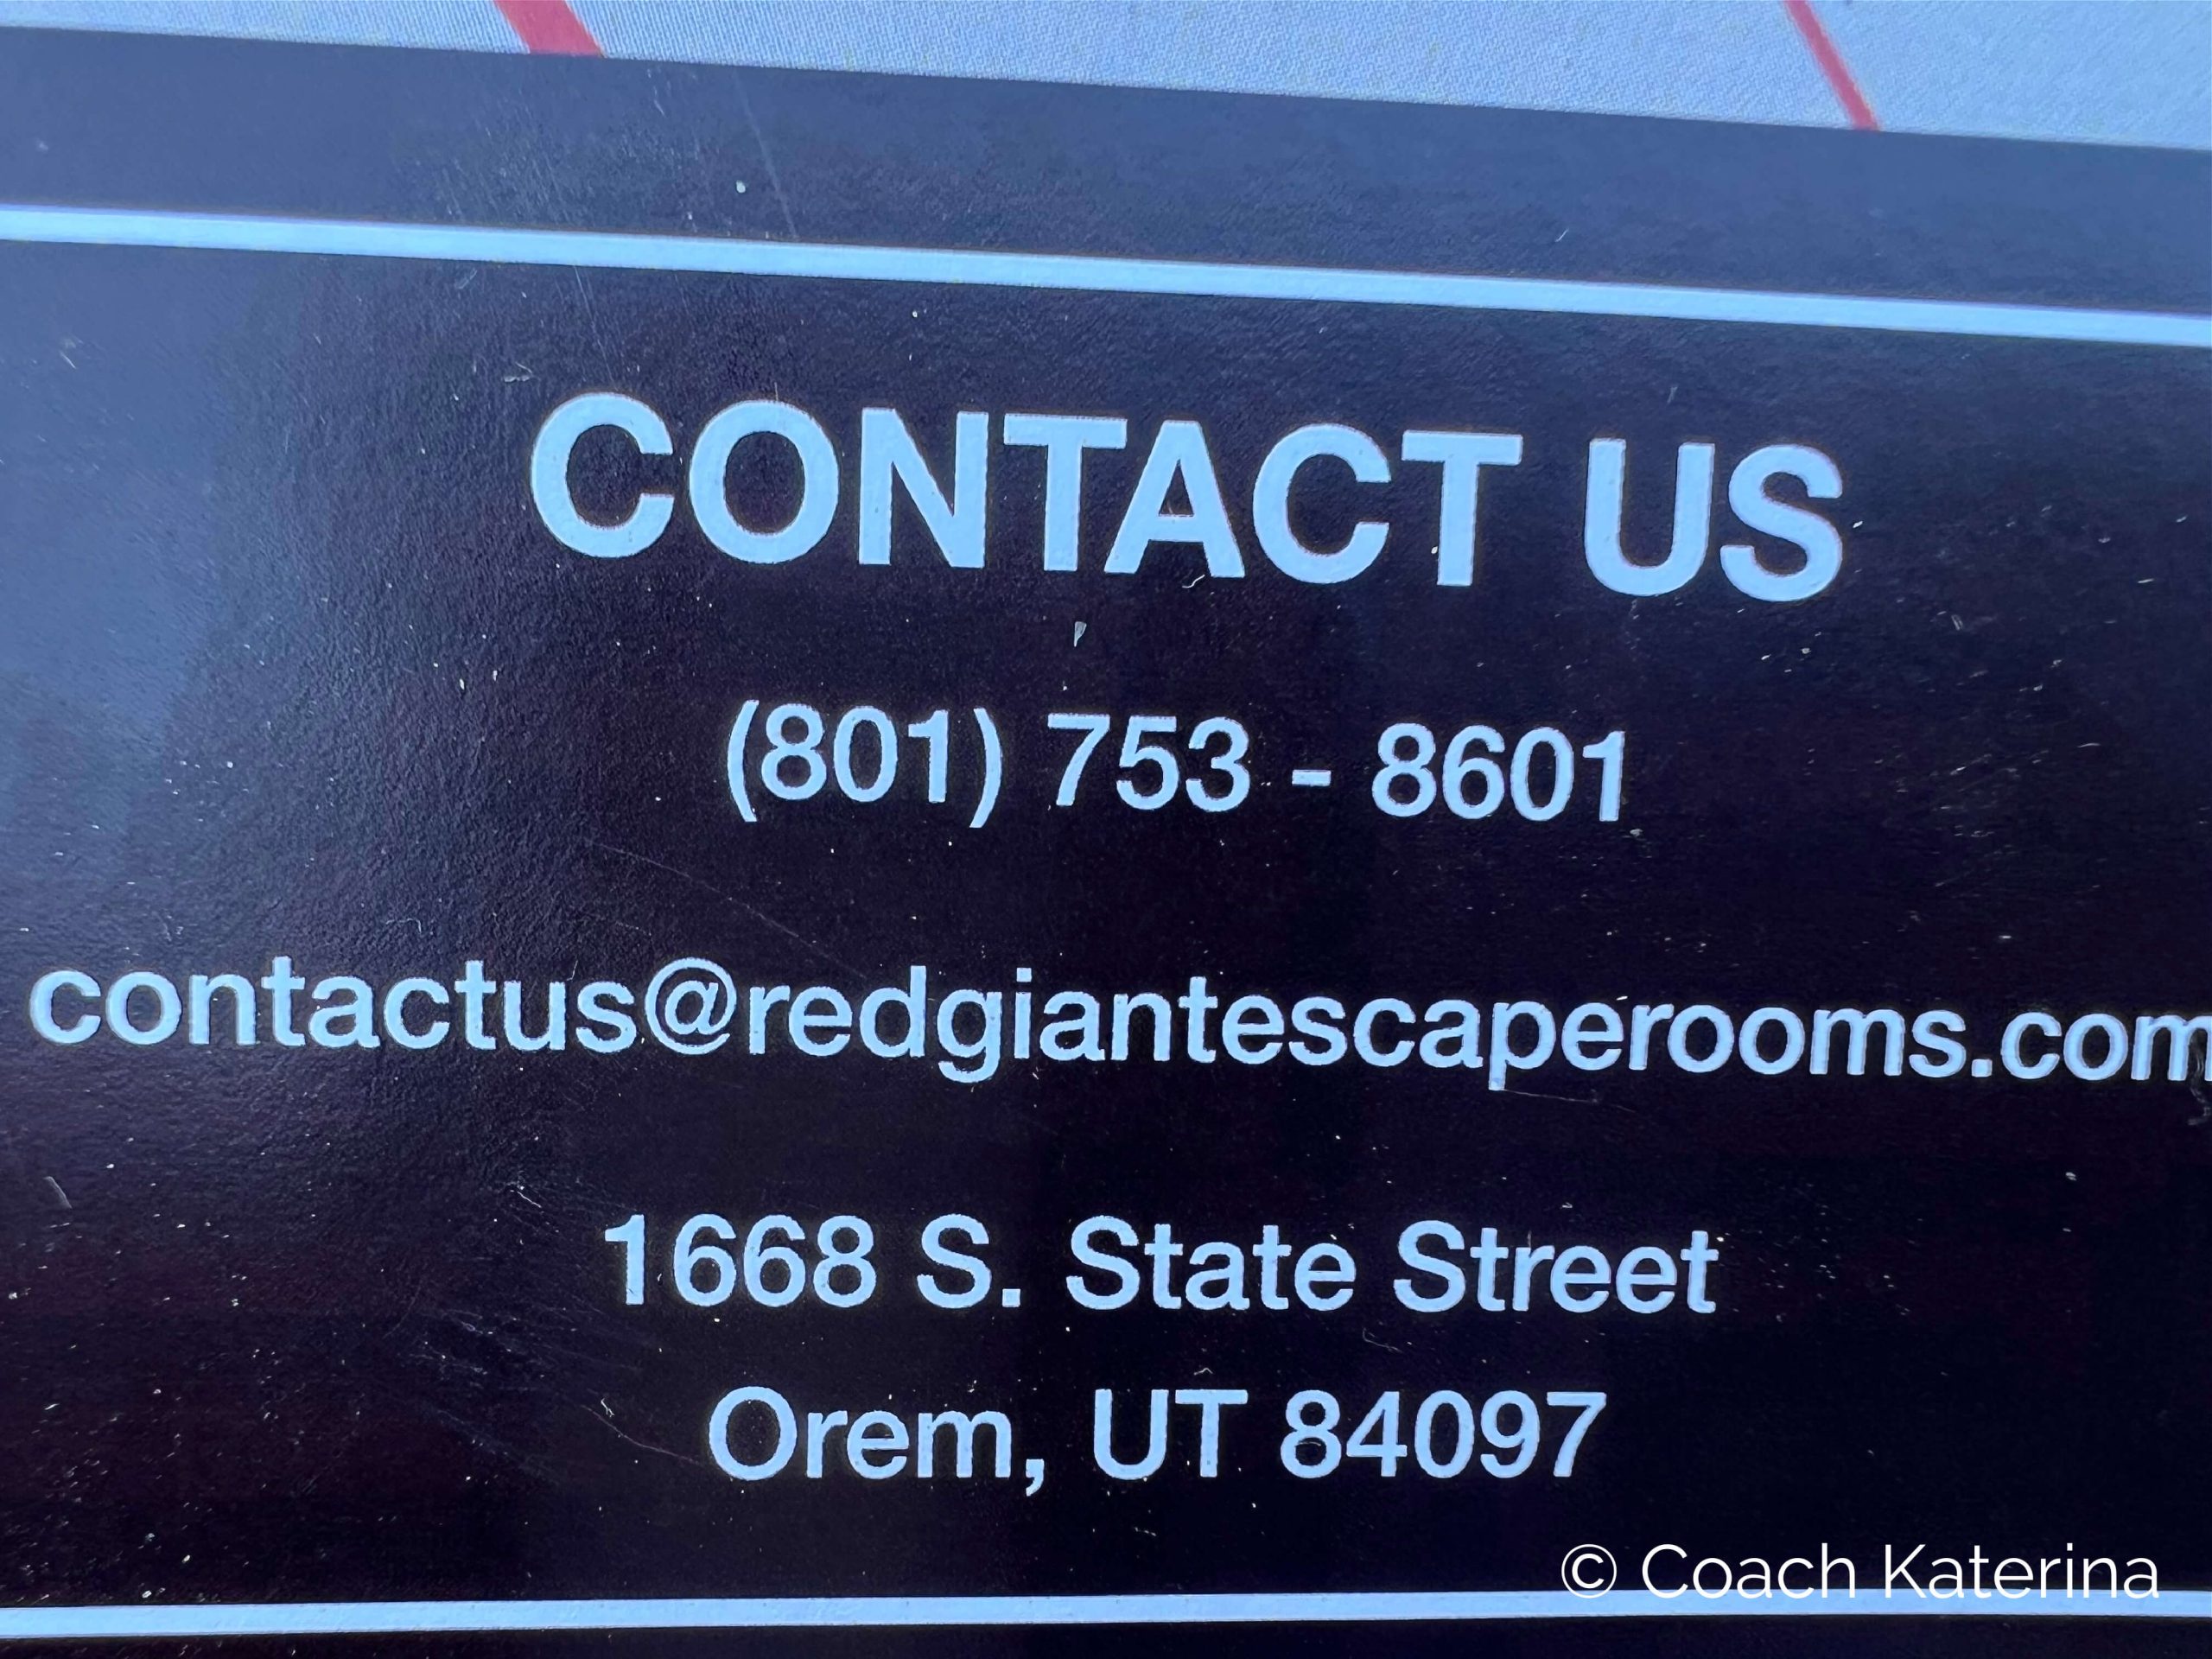 Red Giant Escape Room Contact Number and Address